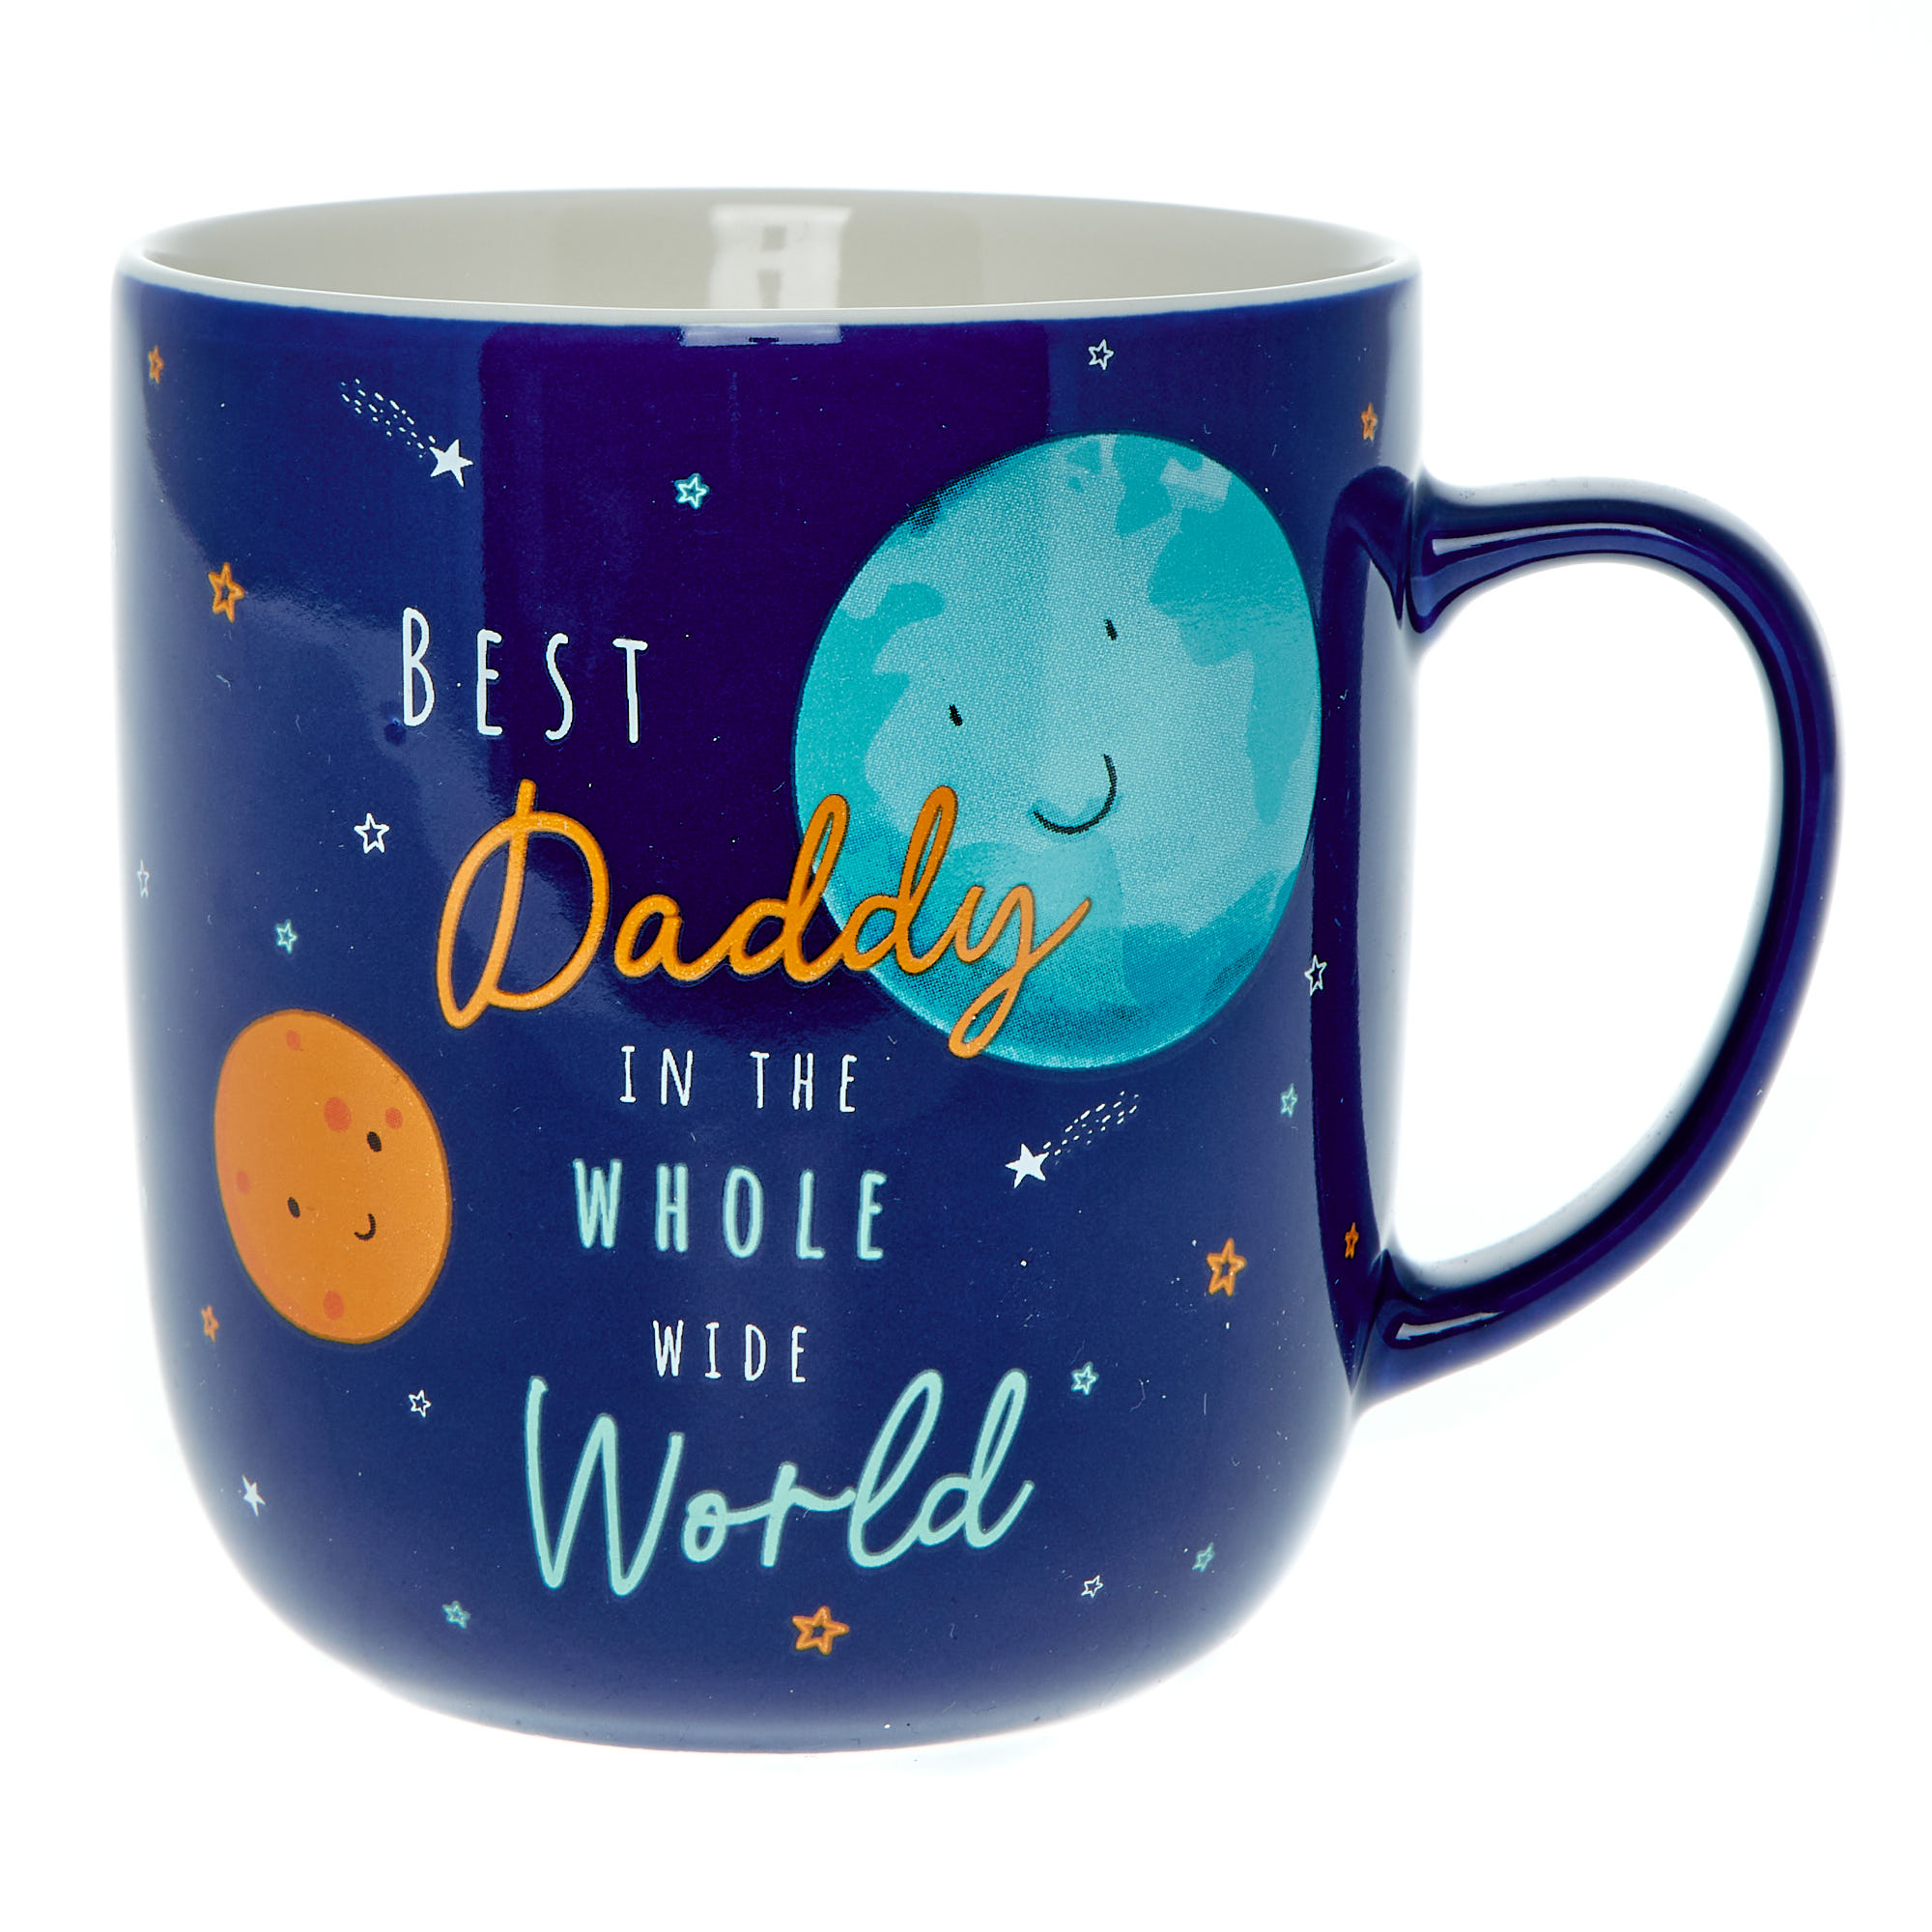 Best Daddy in the Whole World Mug